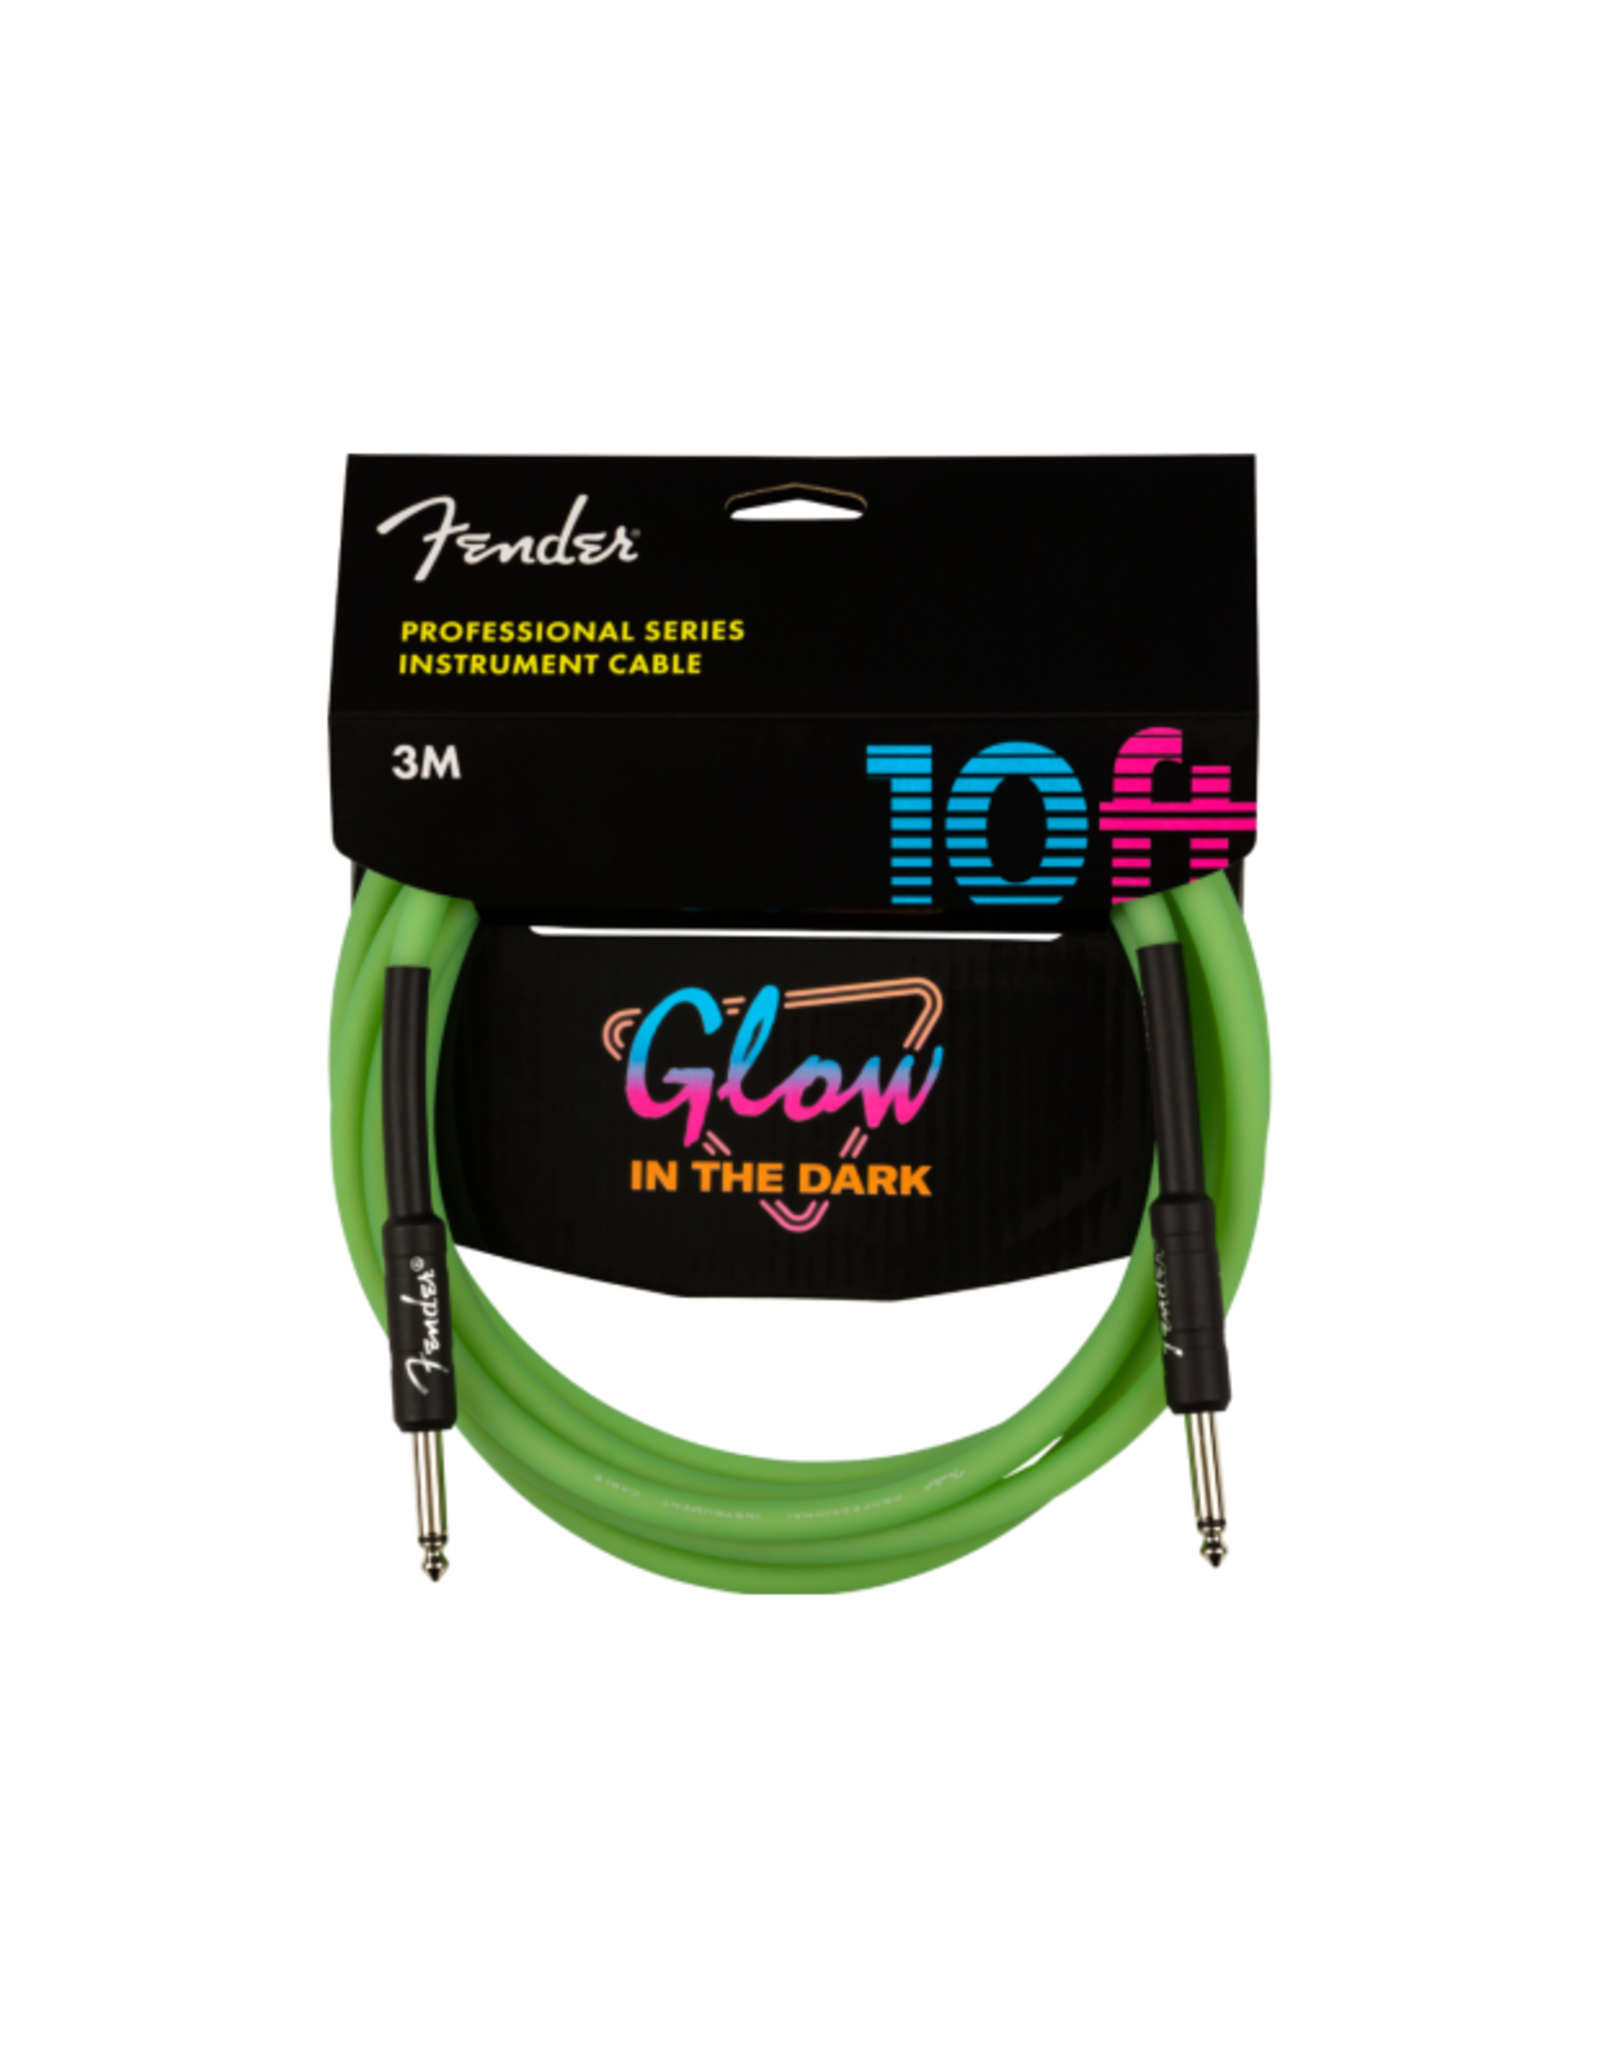 Fender Fender Professional Series Glow in the Dark Cable, Green, 10'